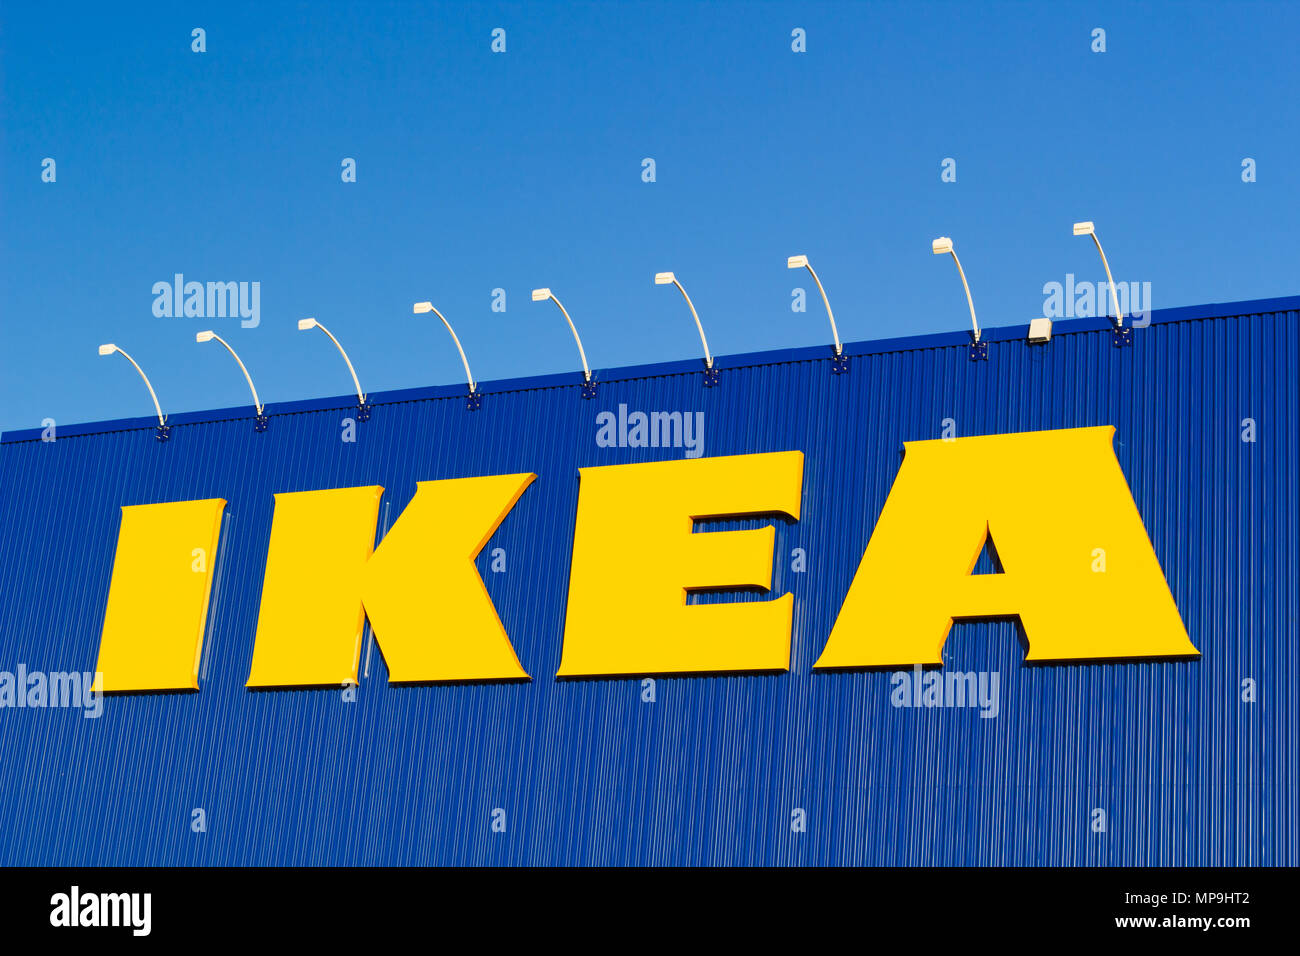 DARTMOUTH, CANADA - MAY 21, 2018: IKEA store sign. IKEA is a multinational company which designs and sells furniture, appliances and home accessories. Stock Photo